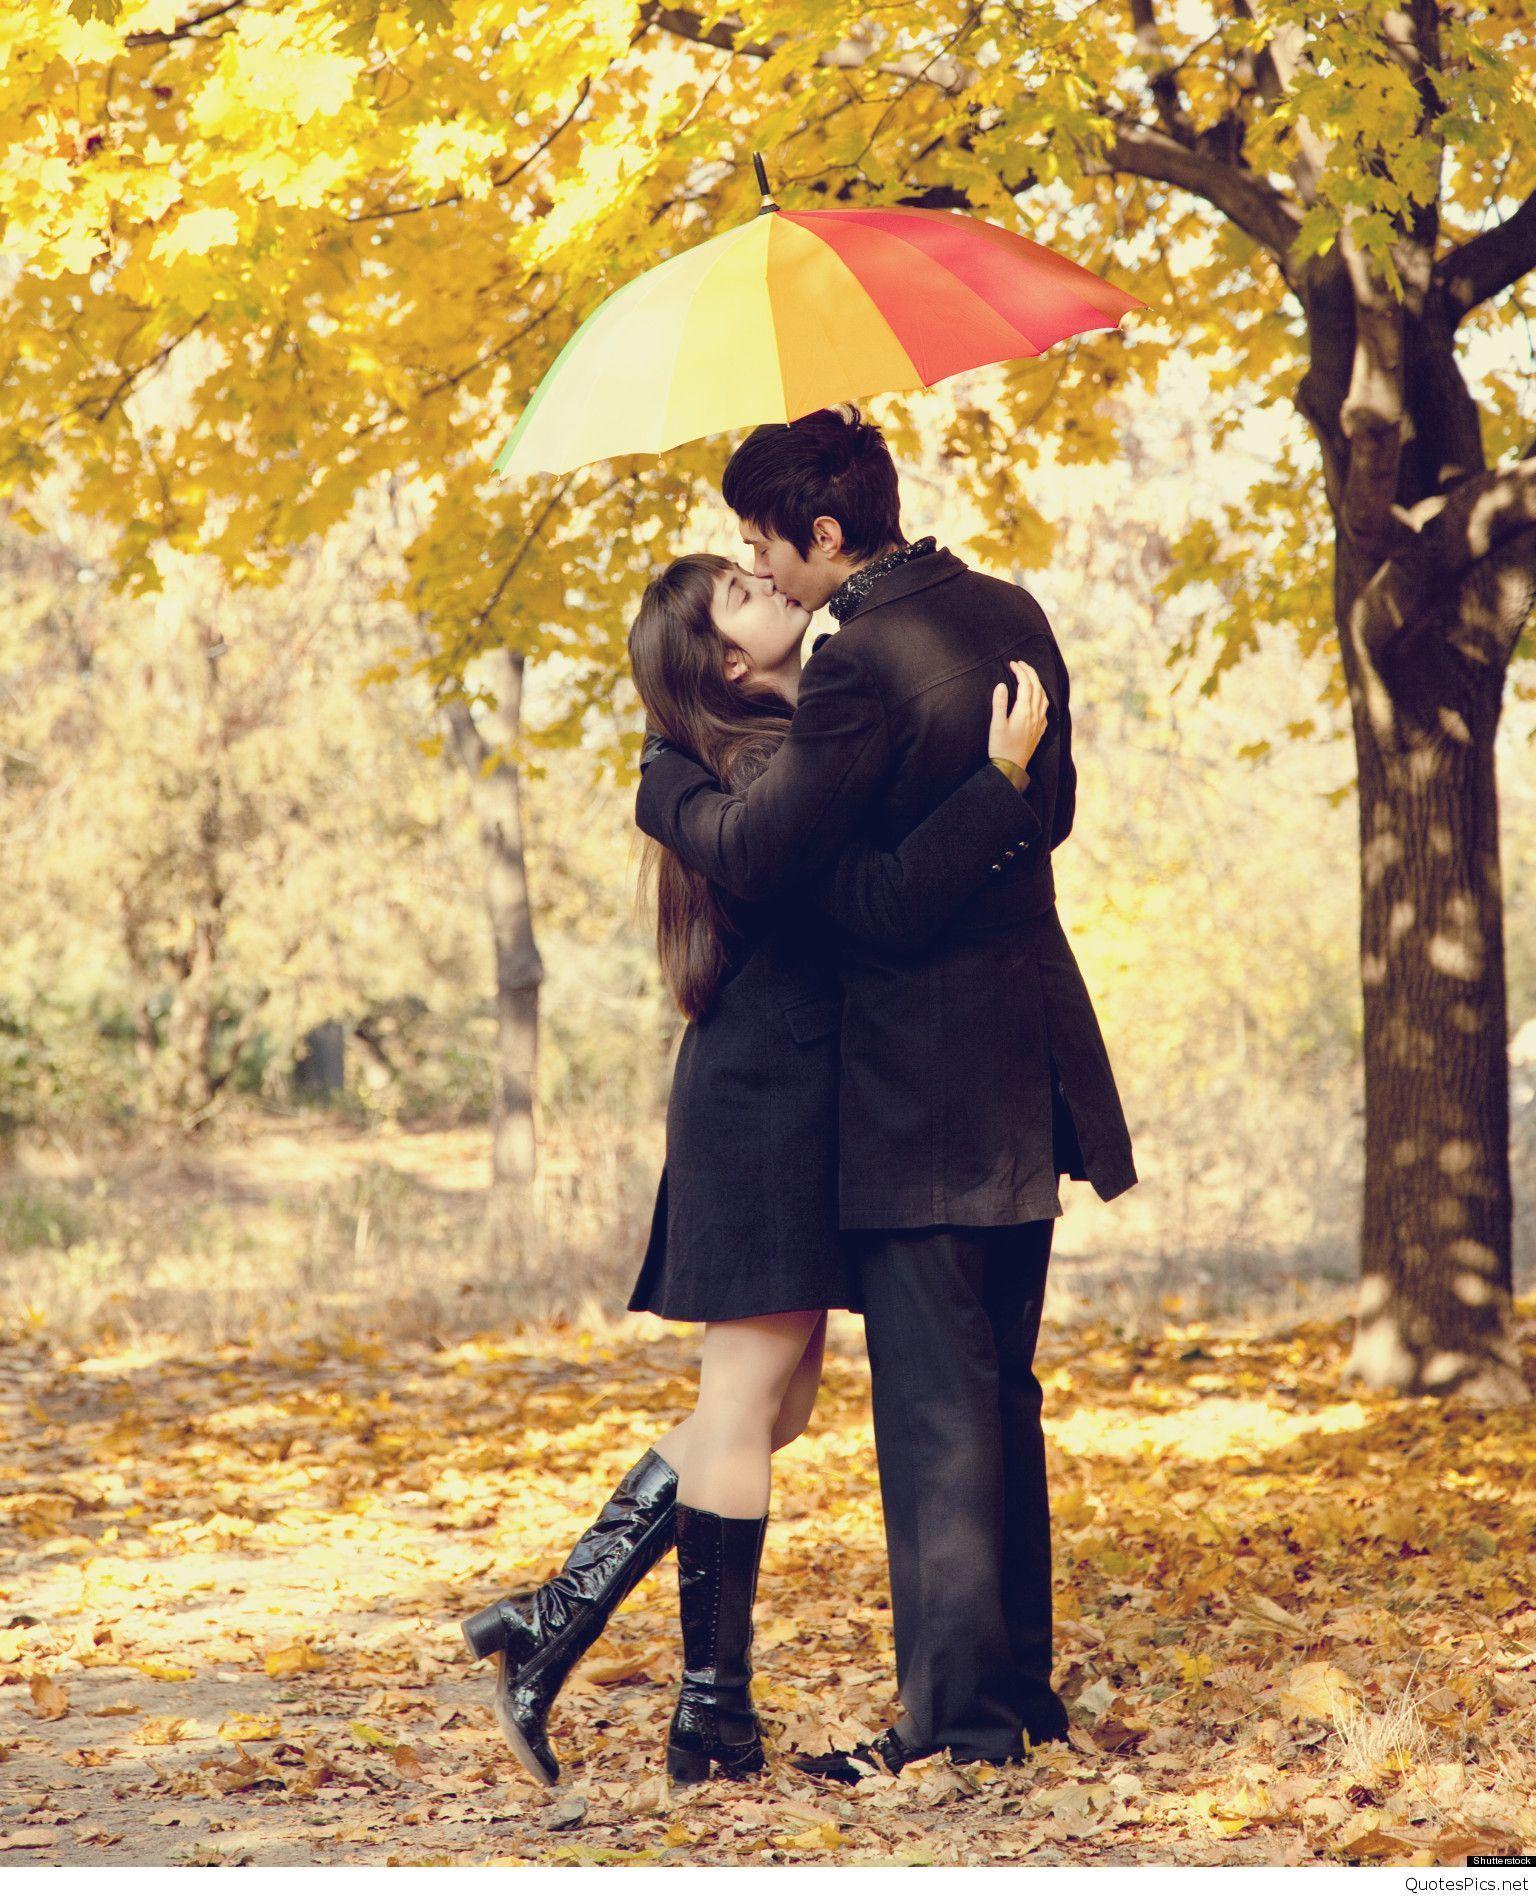 Love couple picture, image and wallpaper for Facebook